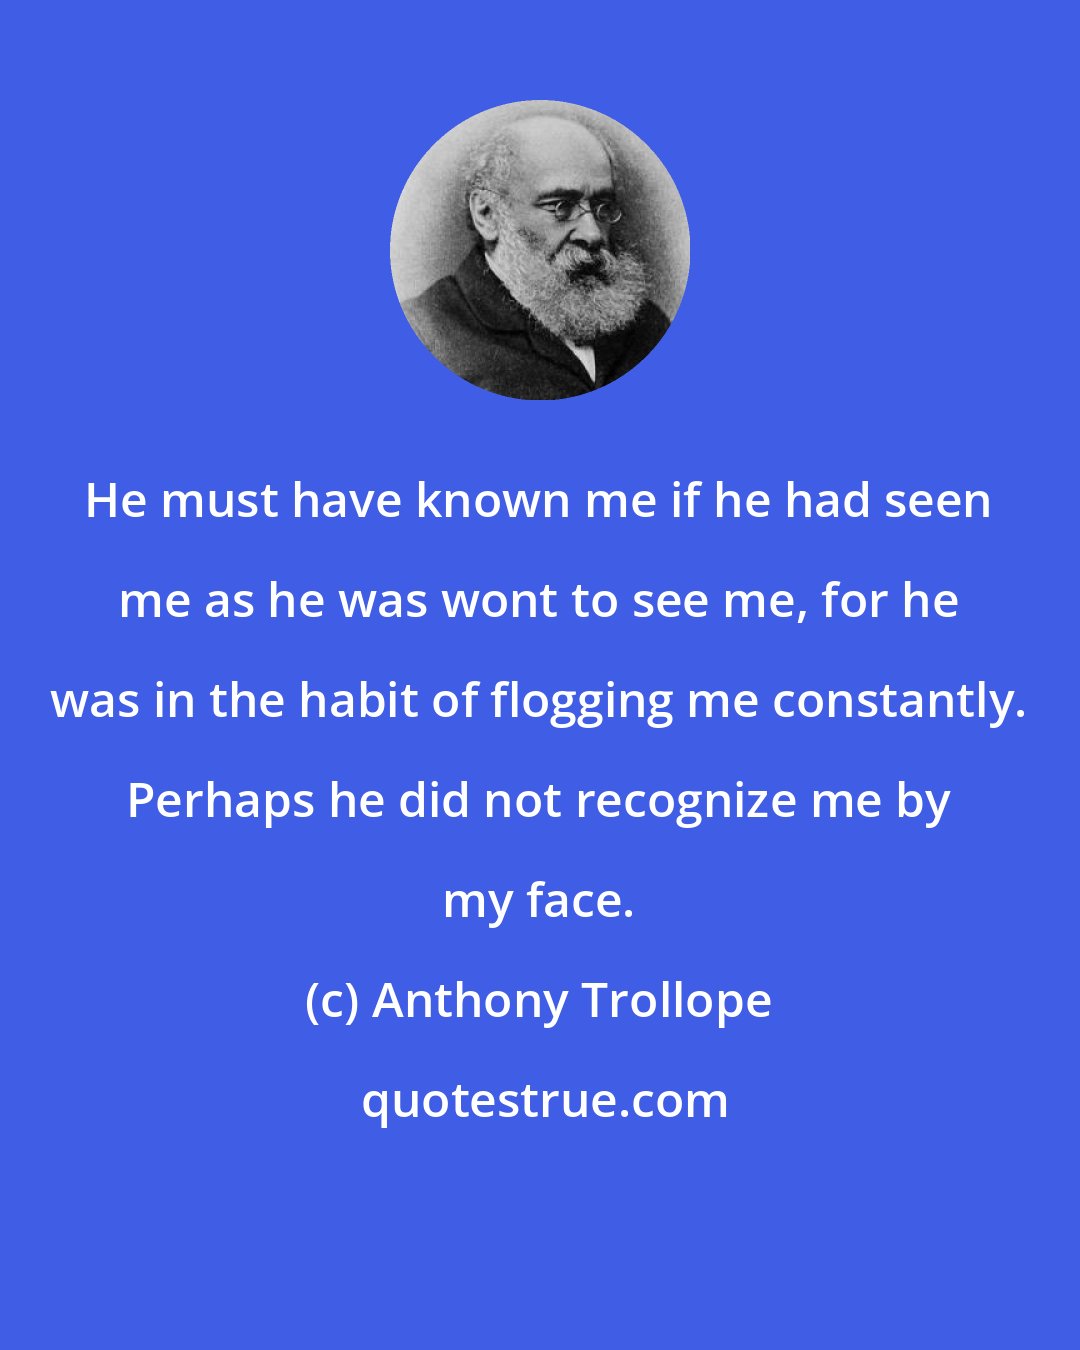 Anthony Trollope: He must have known me if he had seen me as he was wont to see me, for he was in the habit of flogging me constantly. Perhaps he did not recognize me by my face.